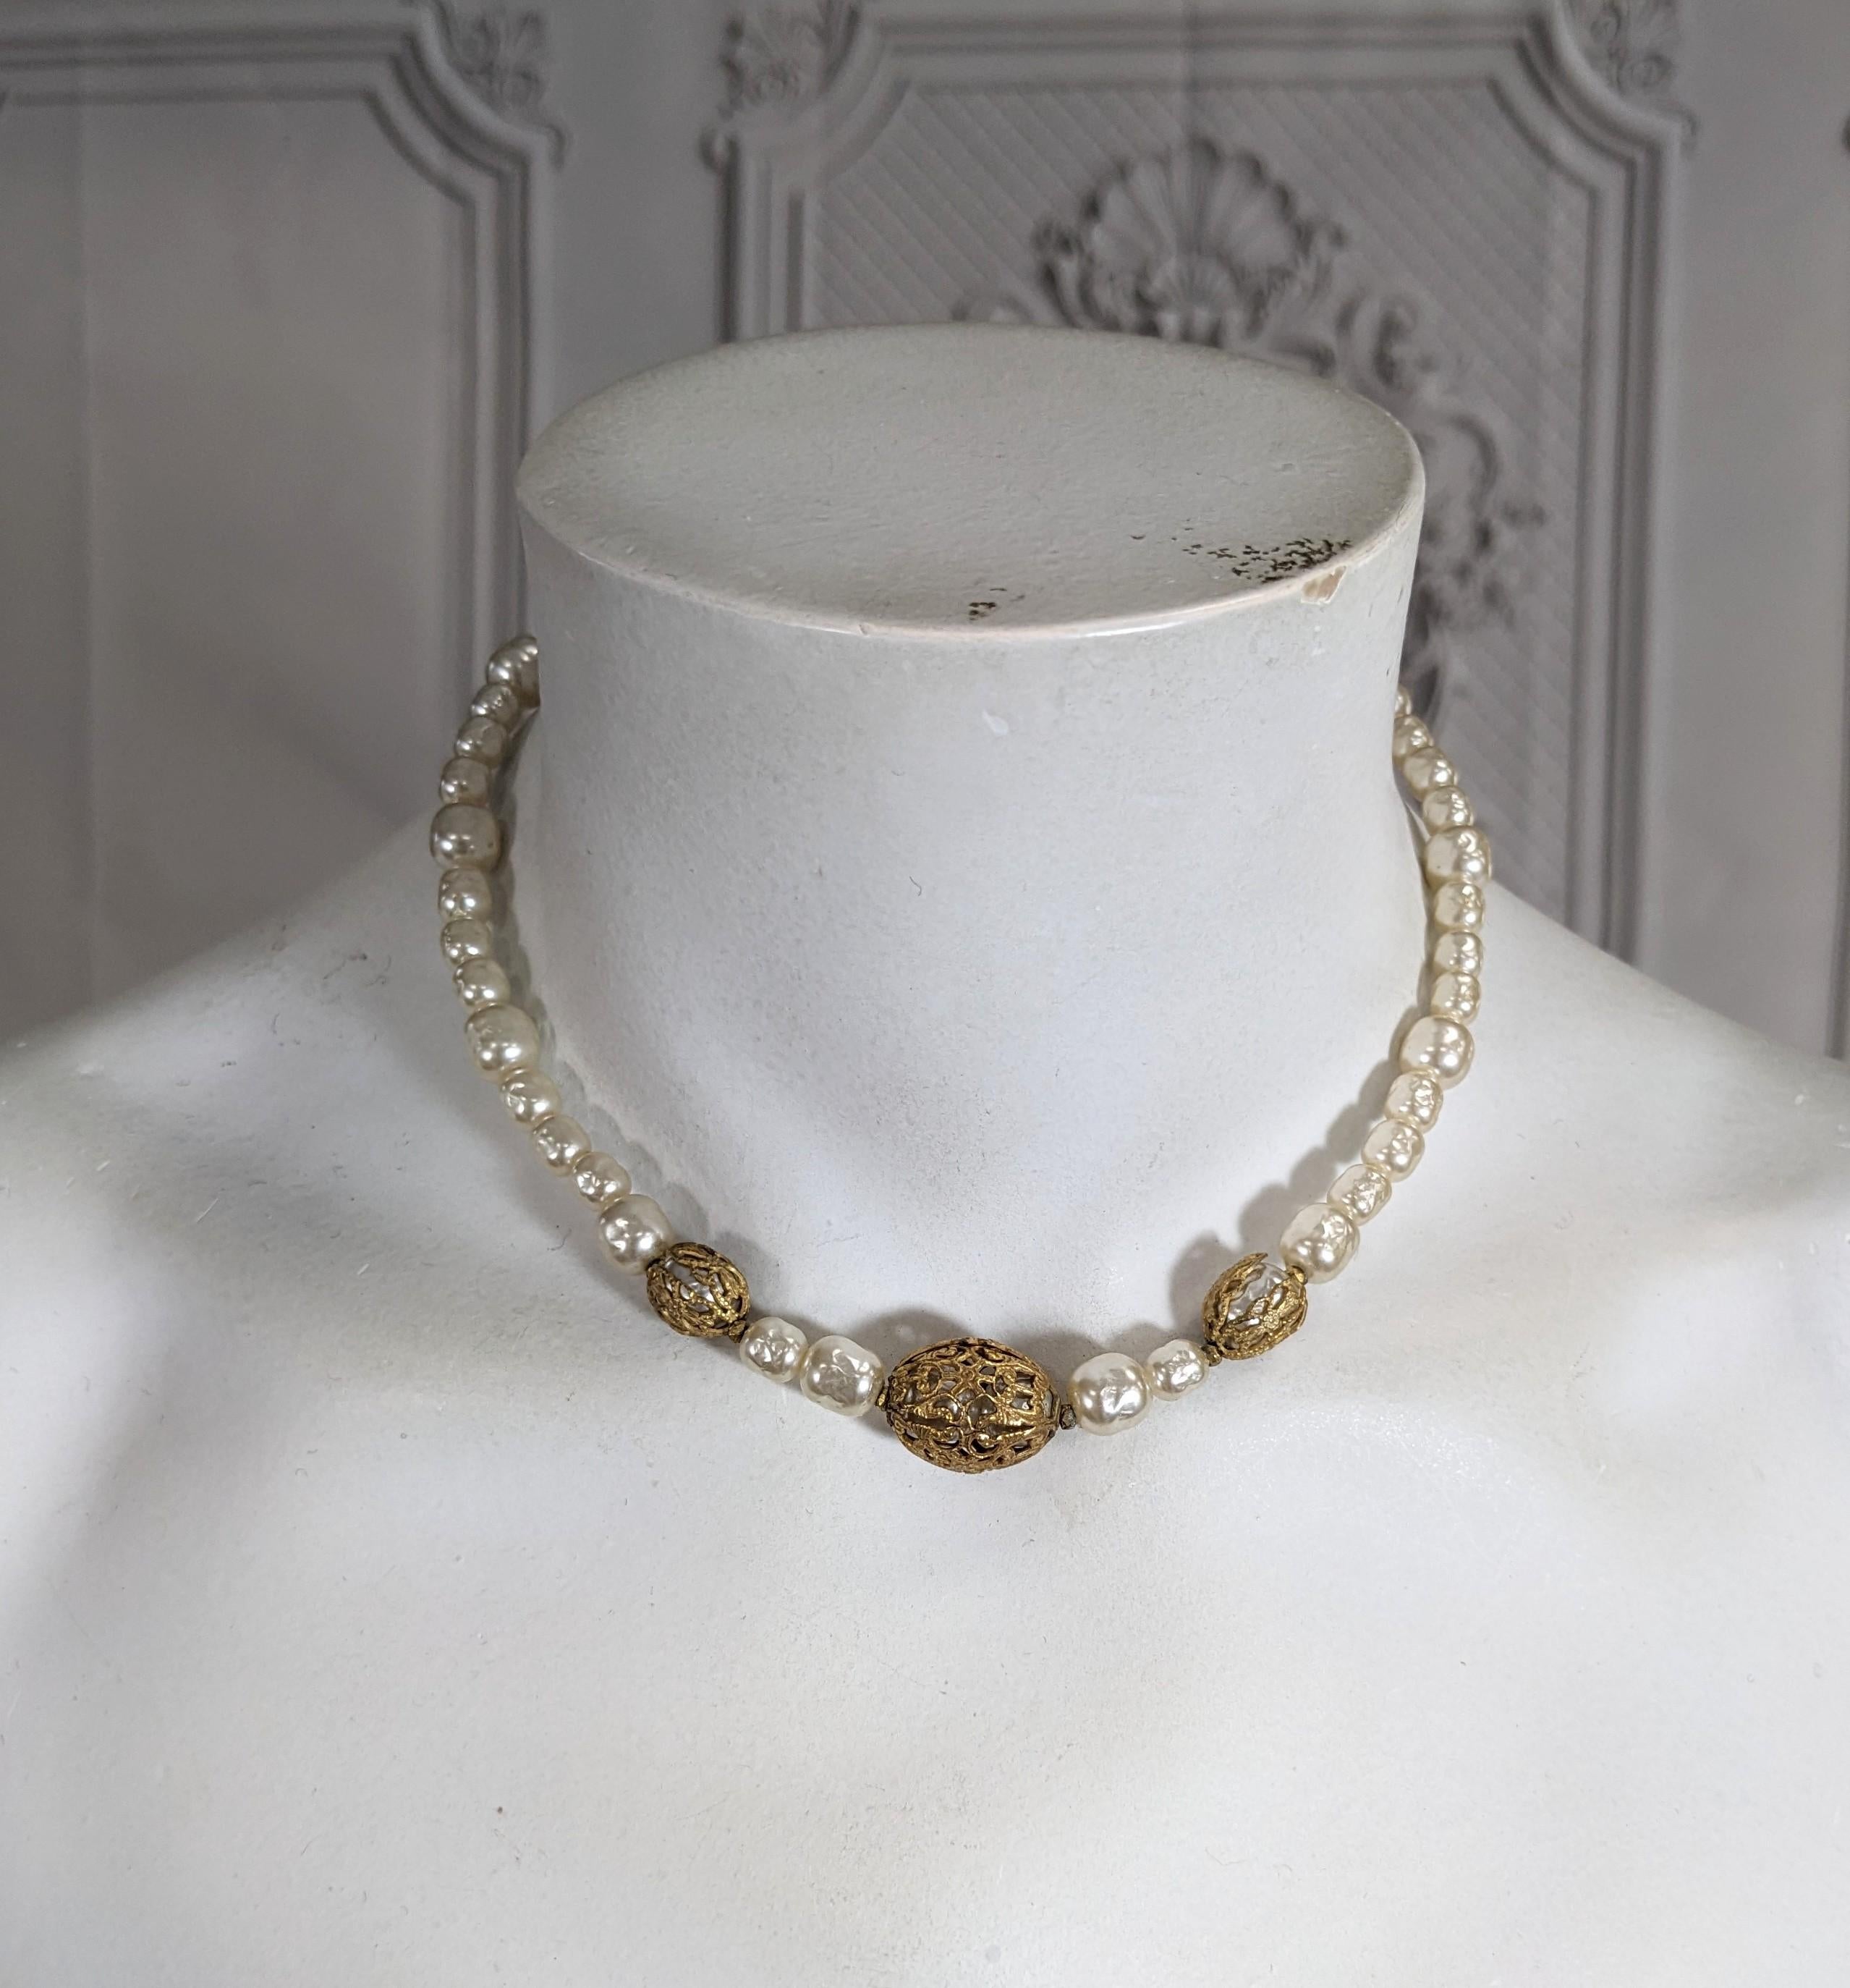 Women's Miriam Haskell Pearl and Gilt Filigree Necklace For Sale